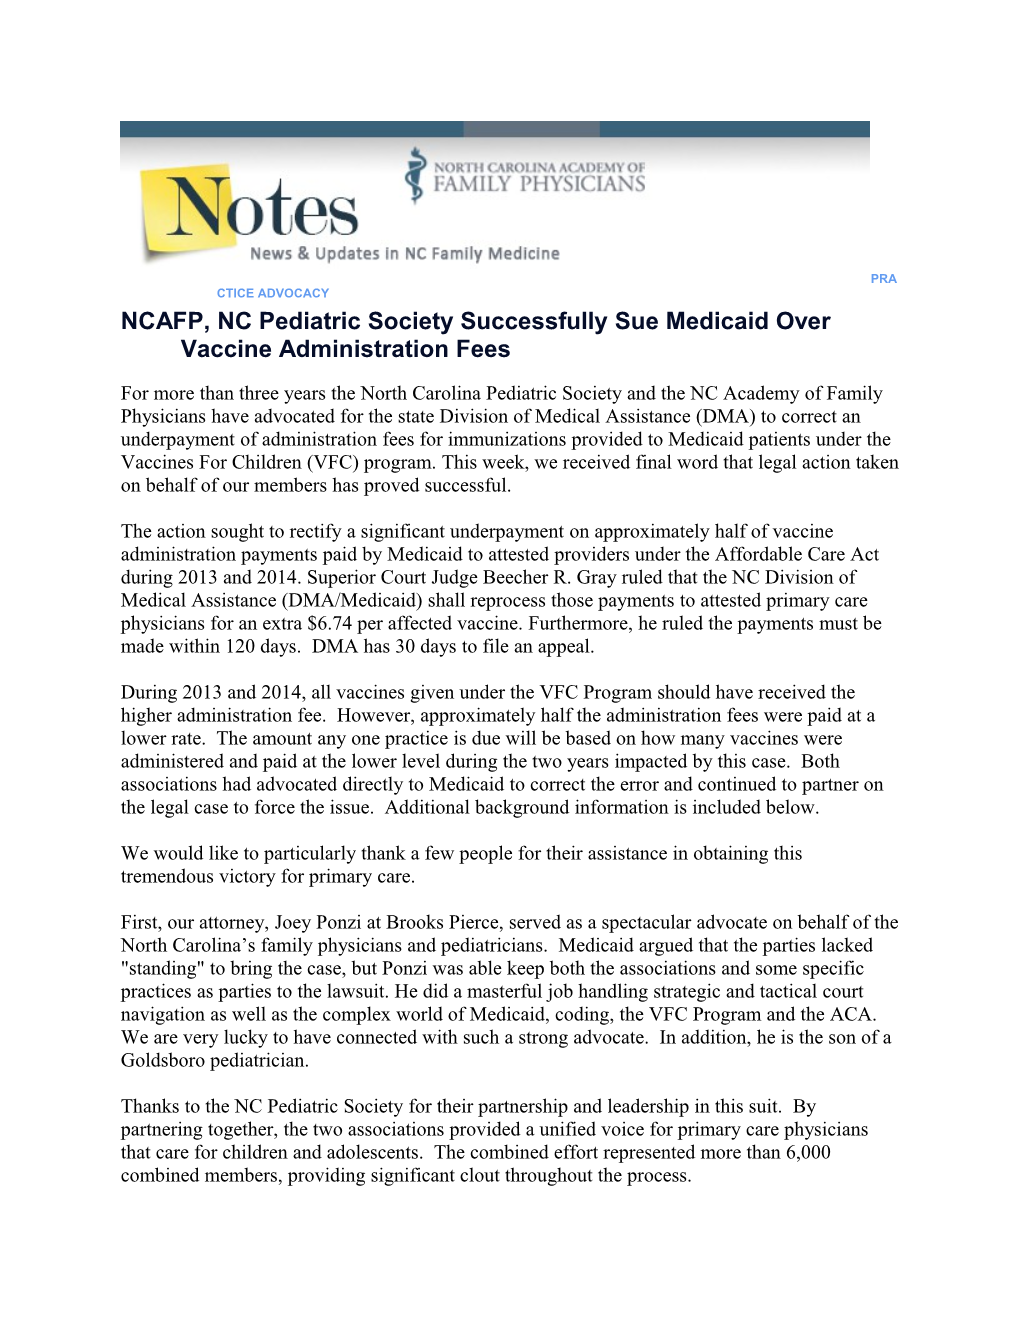 NCAFP, NC Pediatric Society Successfully Sue Medicaid Over Vaccine Administration Fees